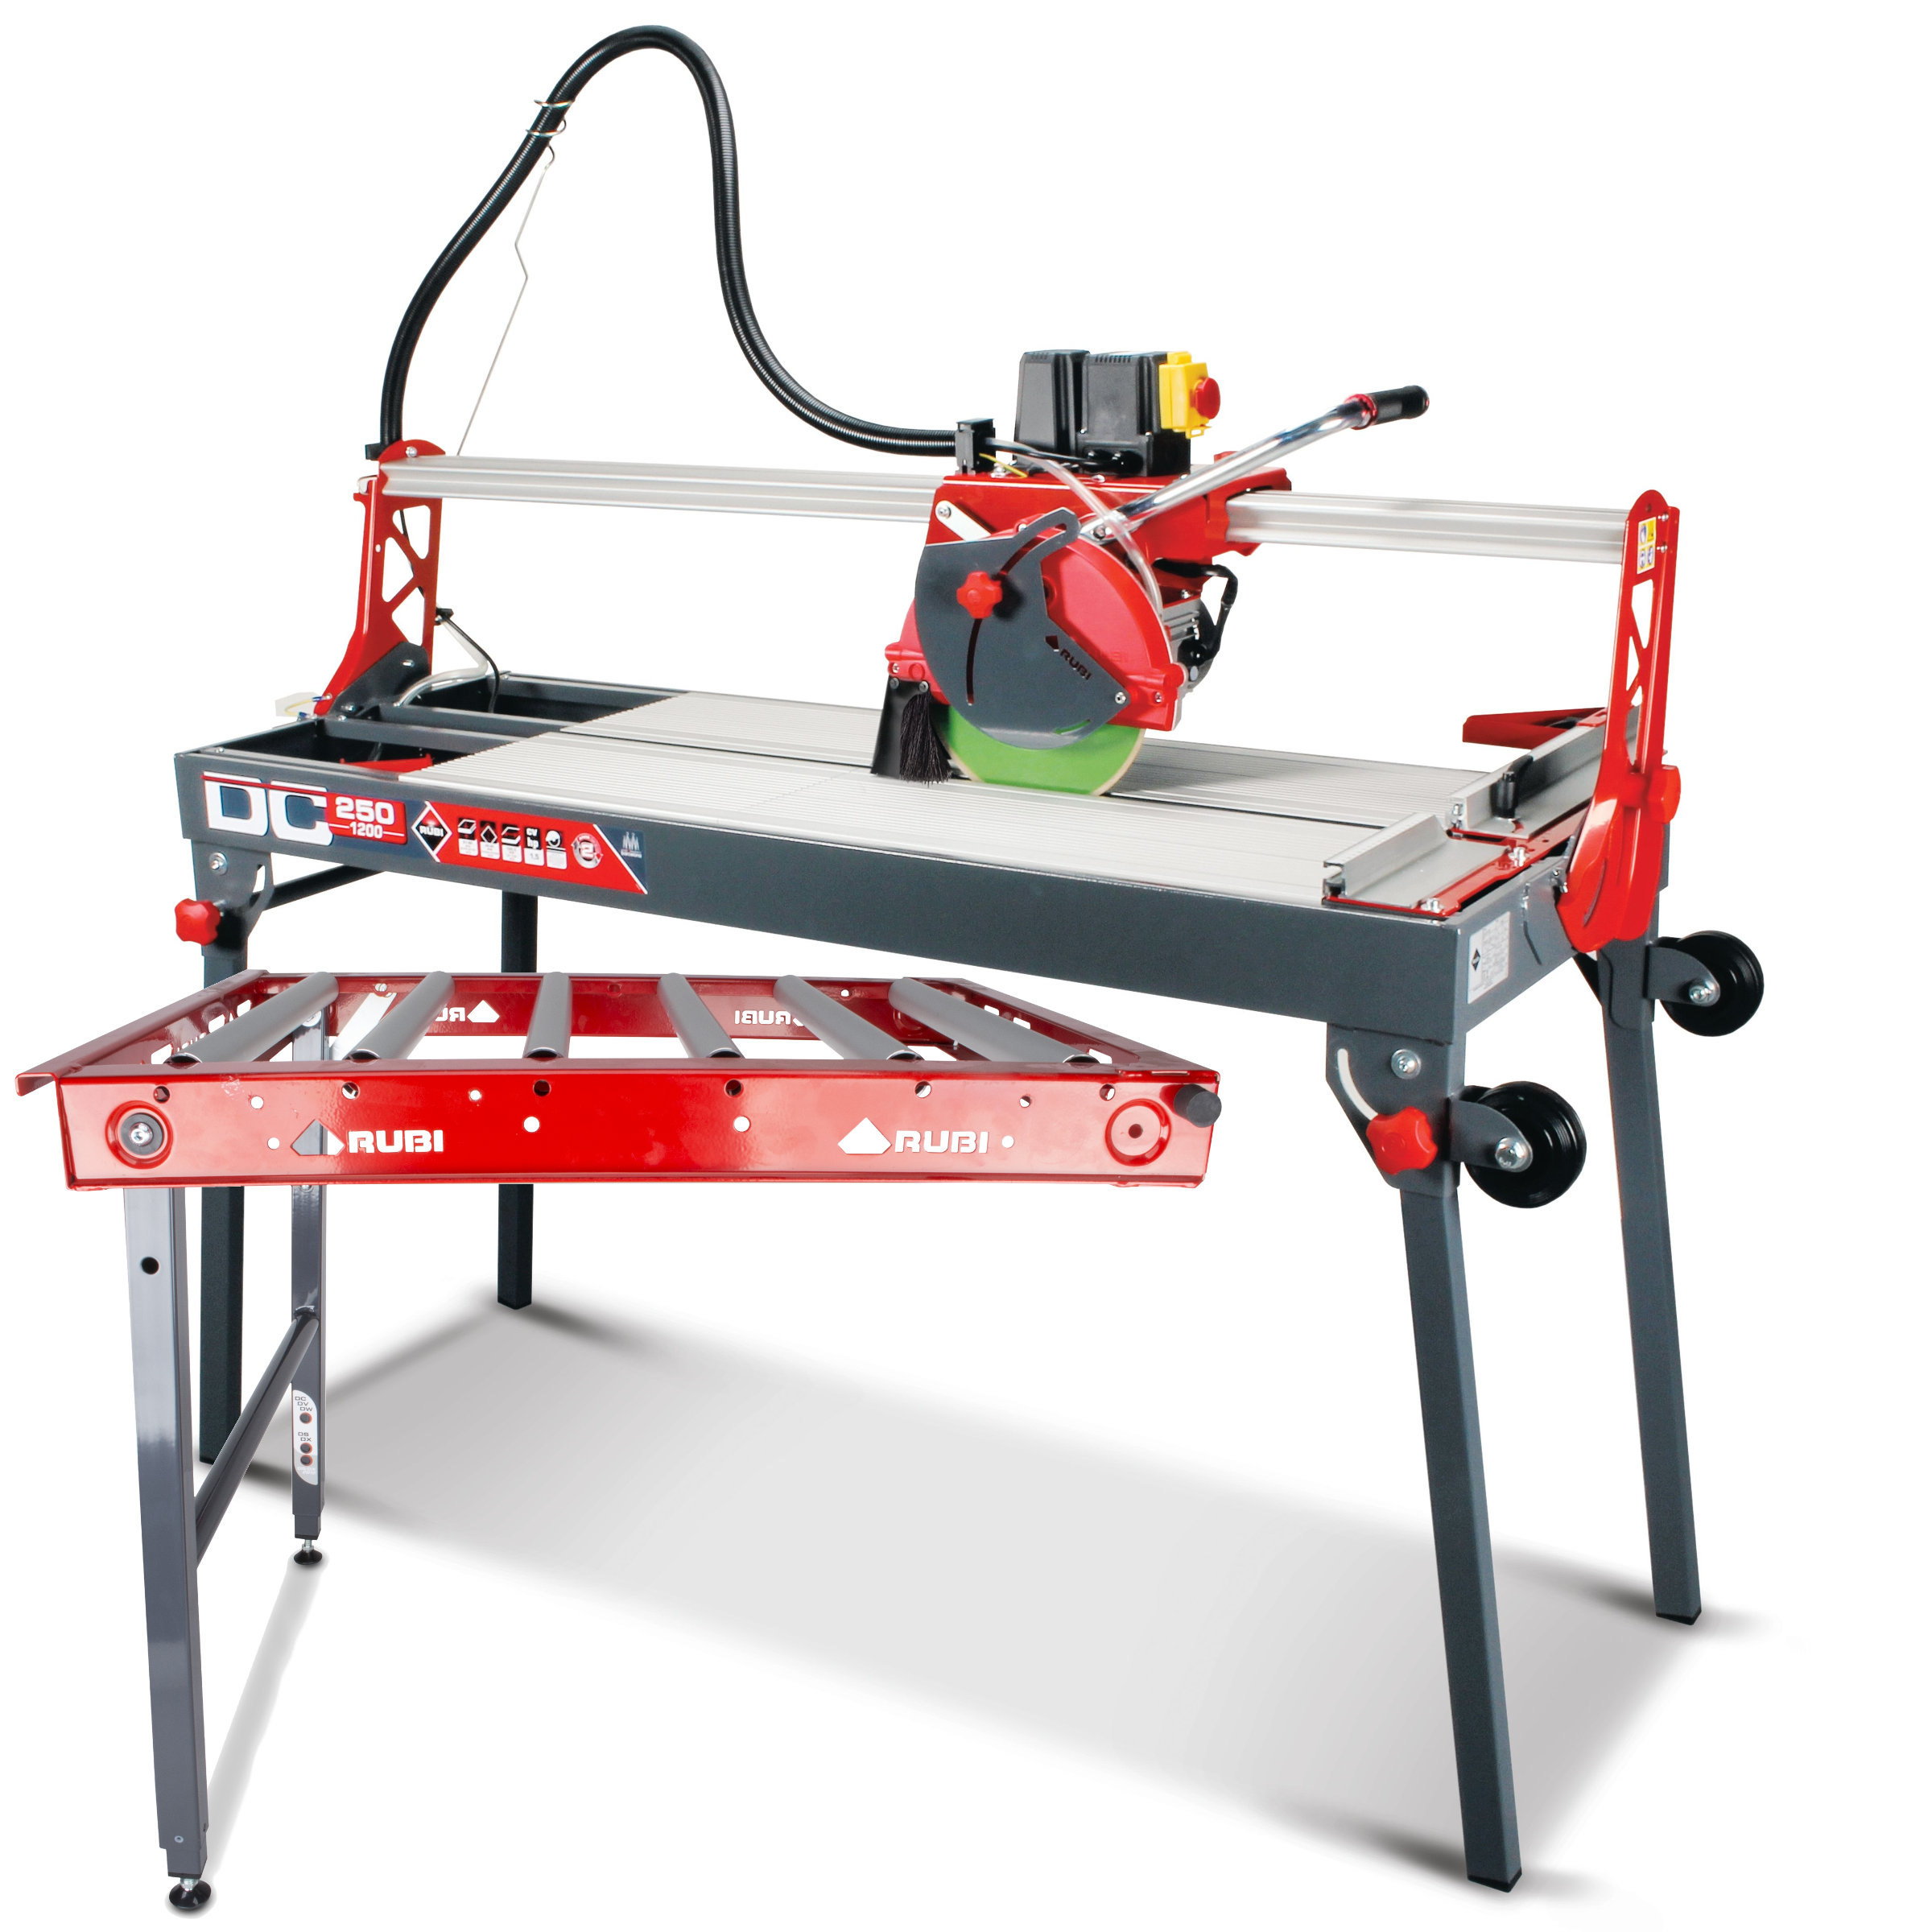 Electric Tile Cutter (Overhead Rail) DC-250 1200 110v • Wellers Hire